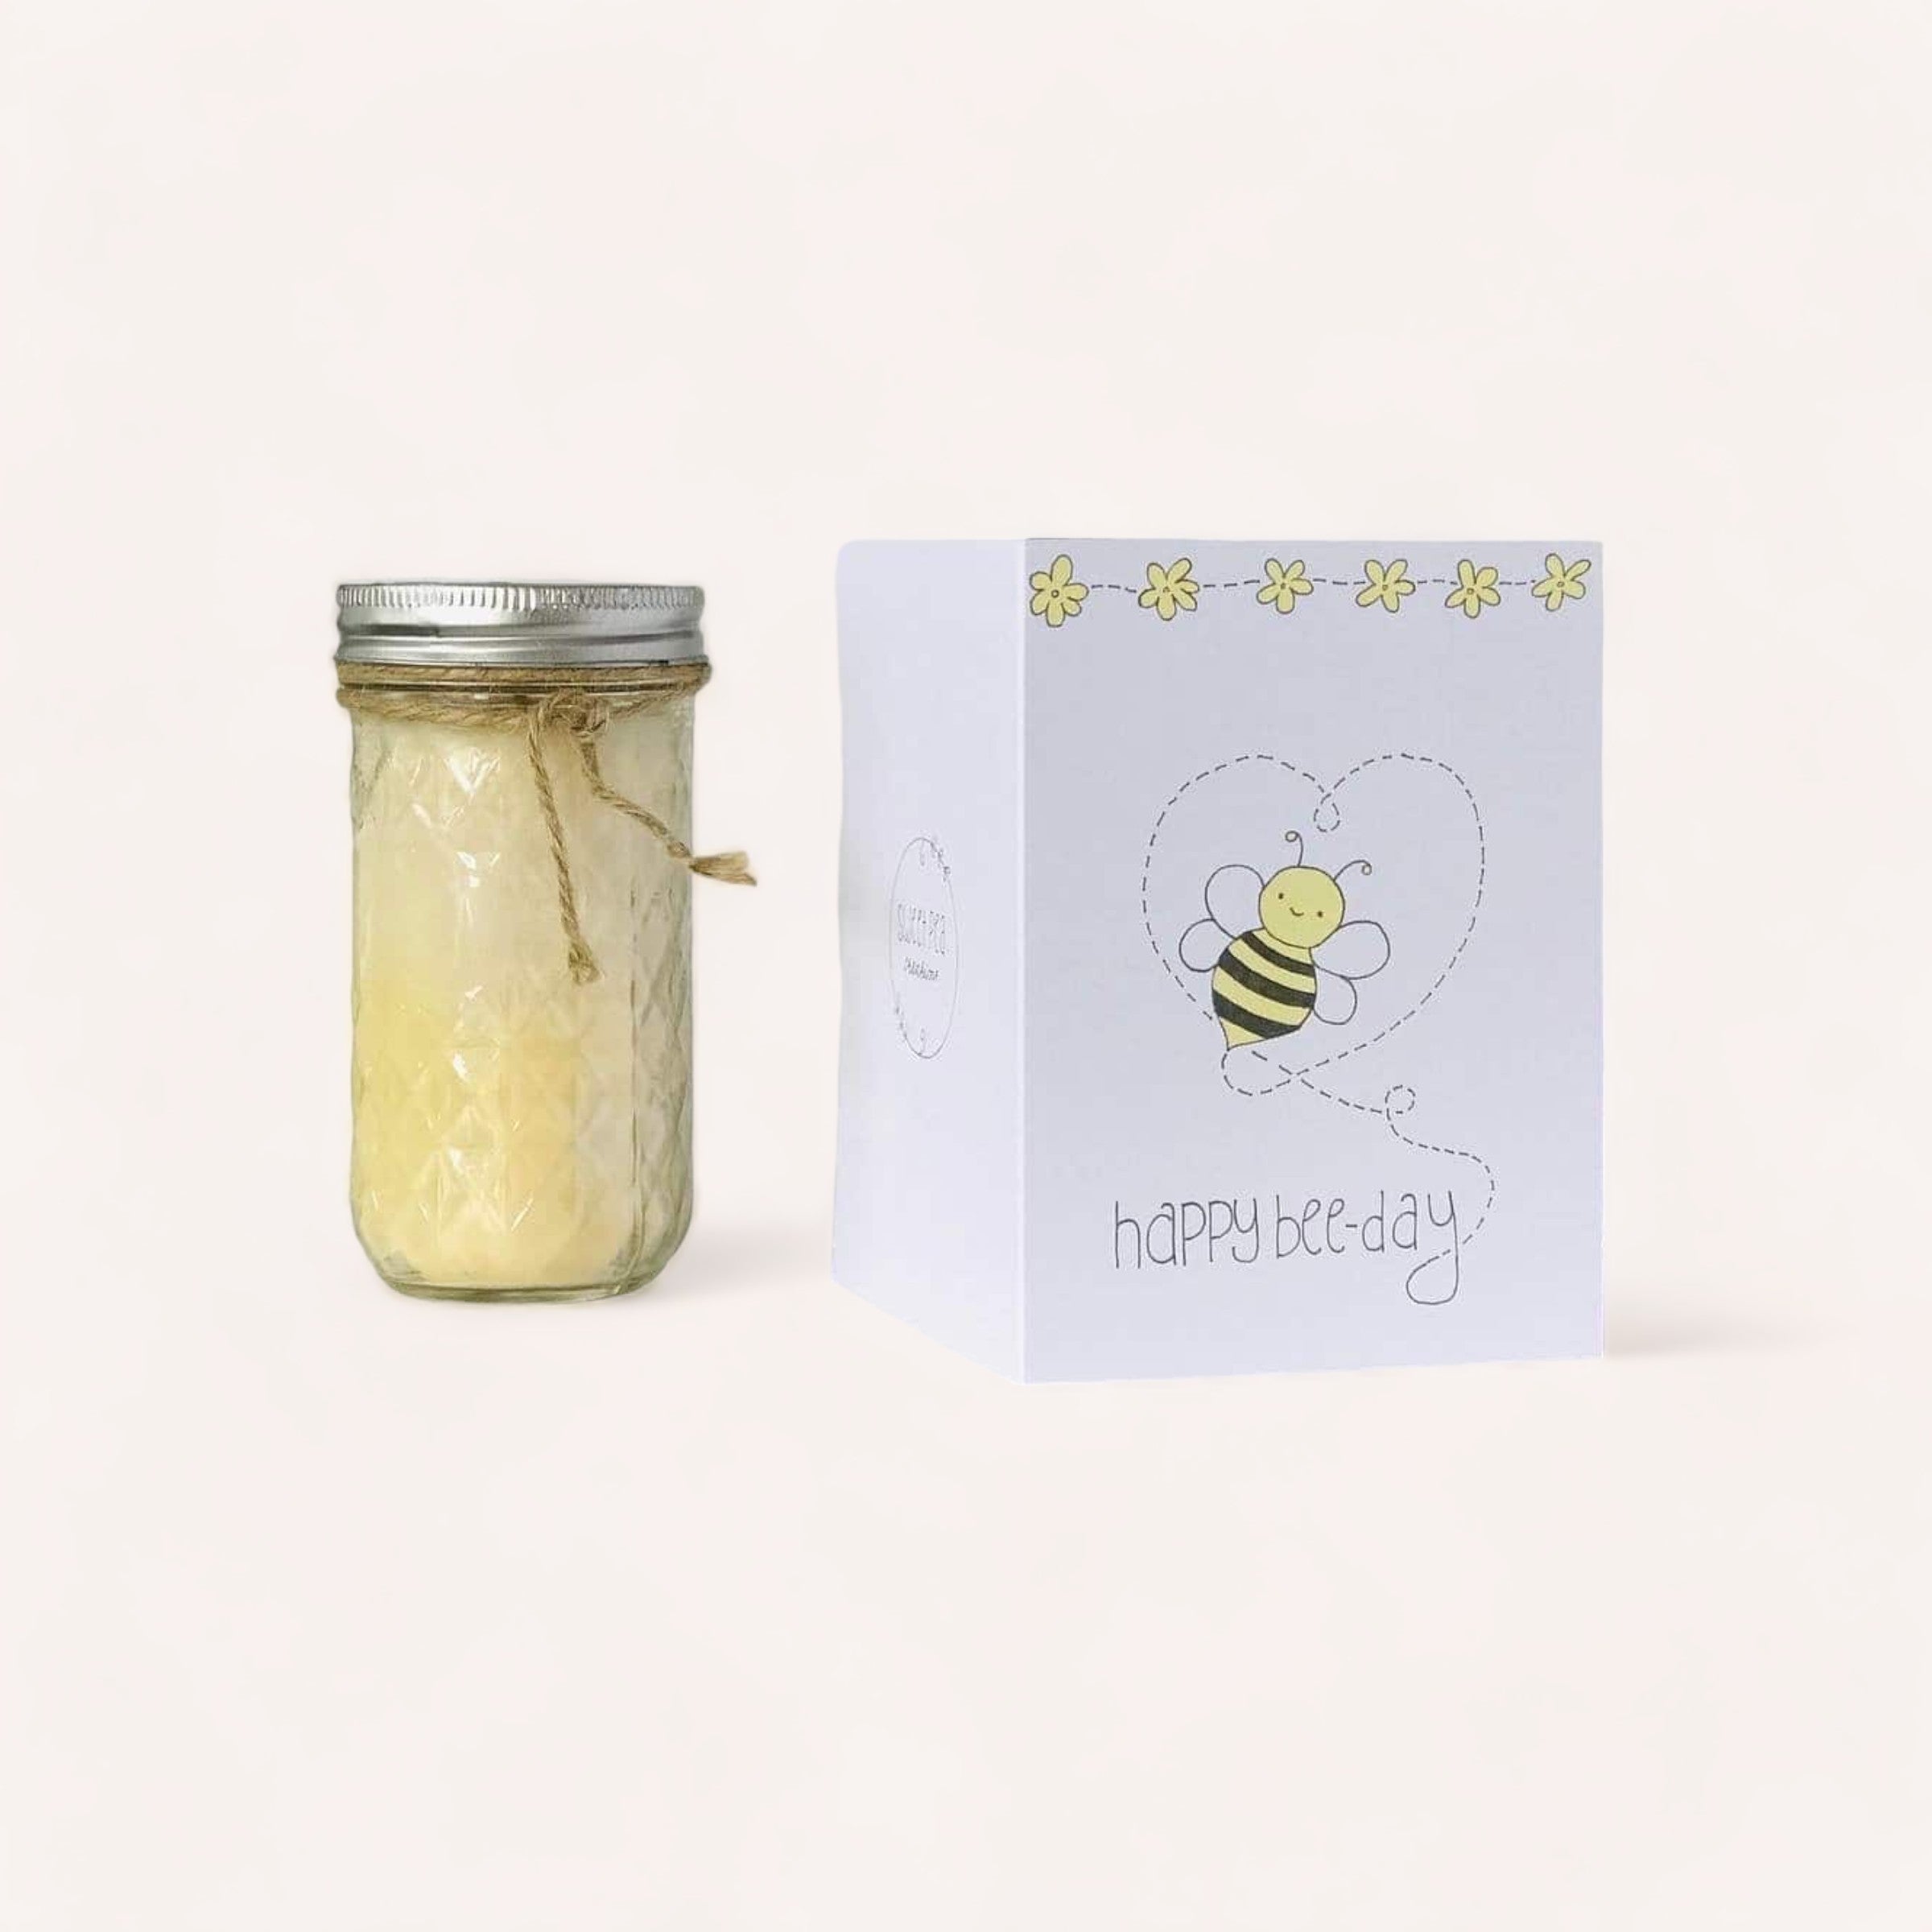 A jar of honey tied with twine paired with a Happy Bee-Day Birthday Card from Sweet Pea Creations featuring a cute bee illustration and the pun "happy bee-day" on a light background.